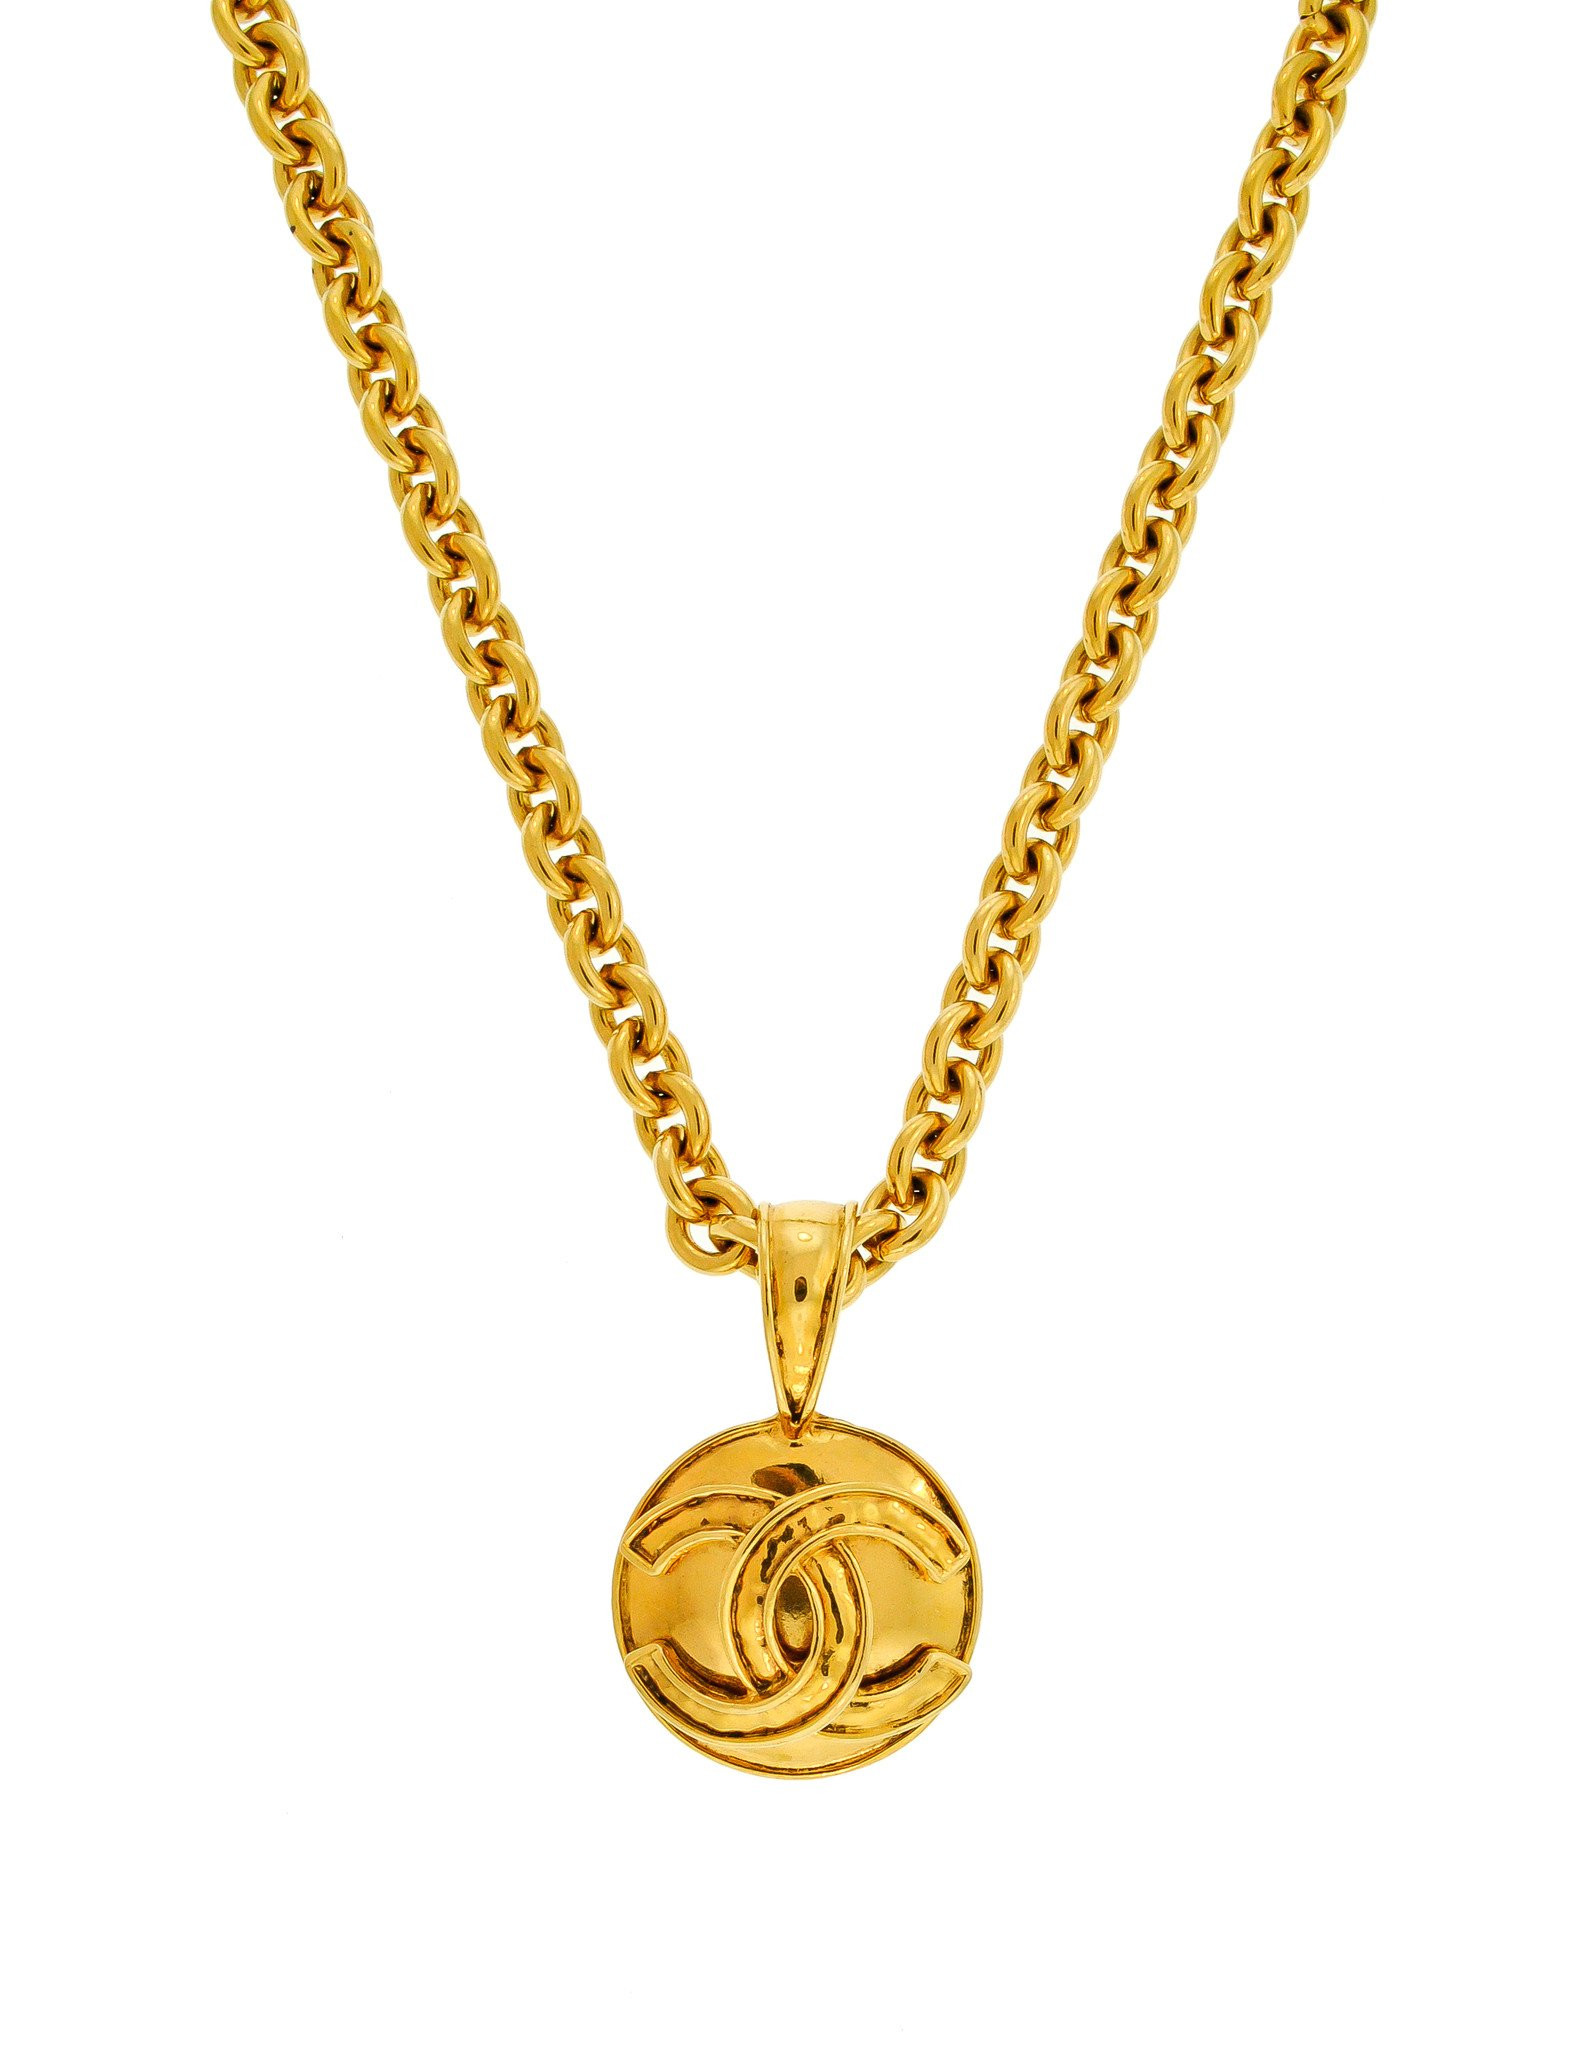 Chanel Pendant Necklace
 Chanel Vintage Gold CC Logo Pendant Necklace from